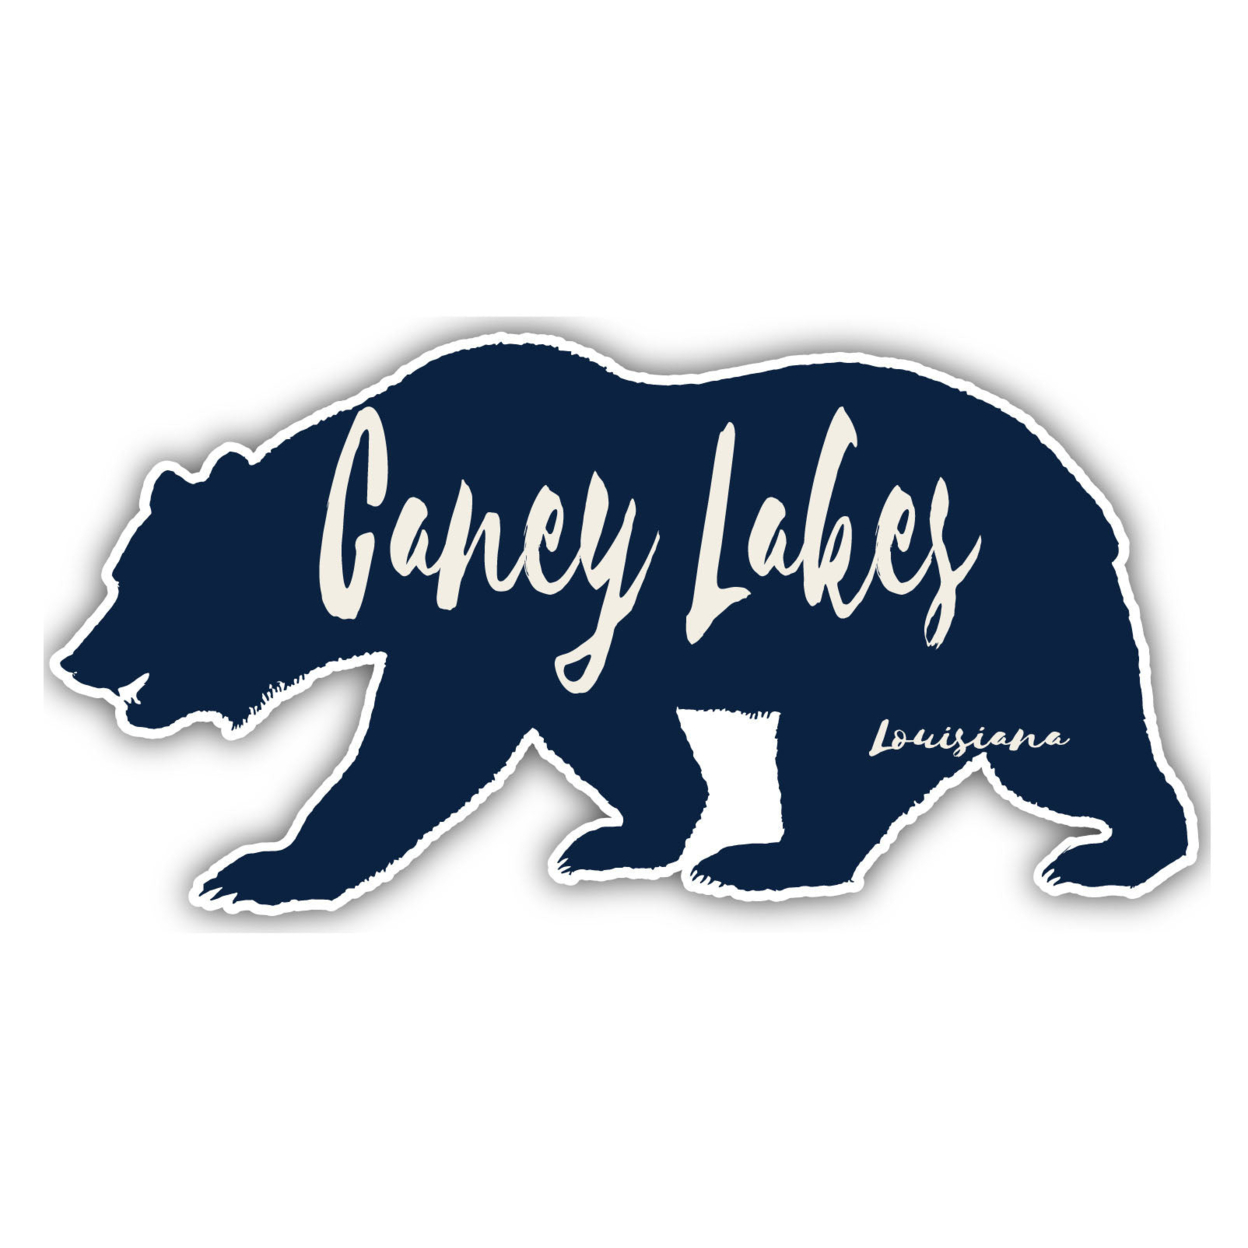 Caney Lakes Louisiana Souvenir Decorative Stickers (Choose Theme And Size) - 4-Pack, 12-Inch, Bear